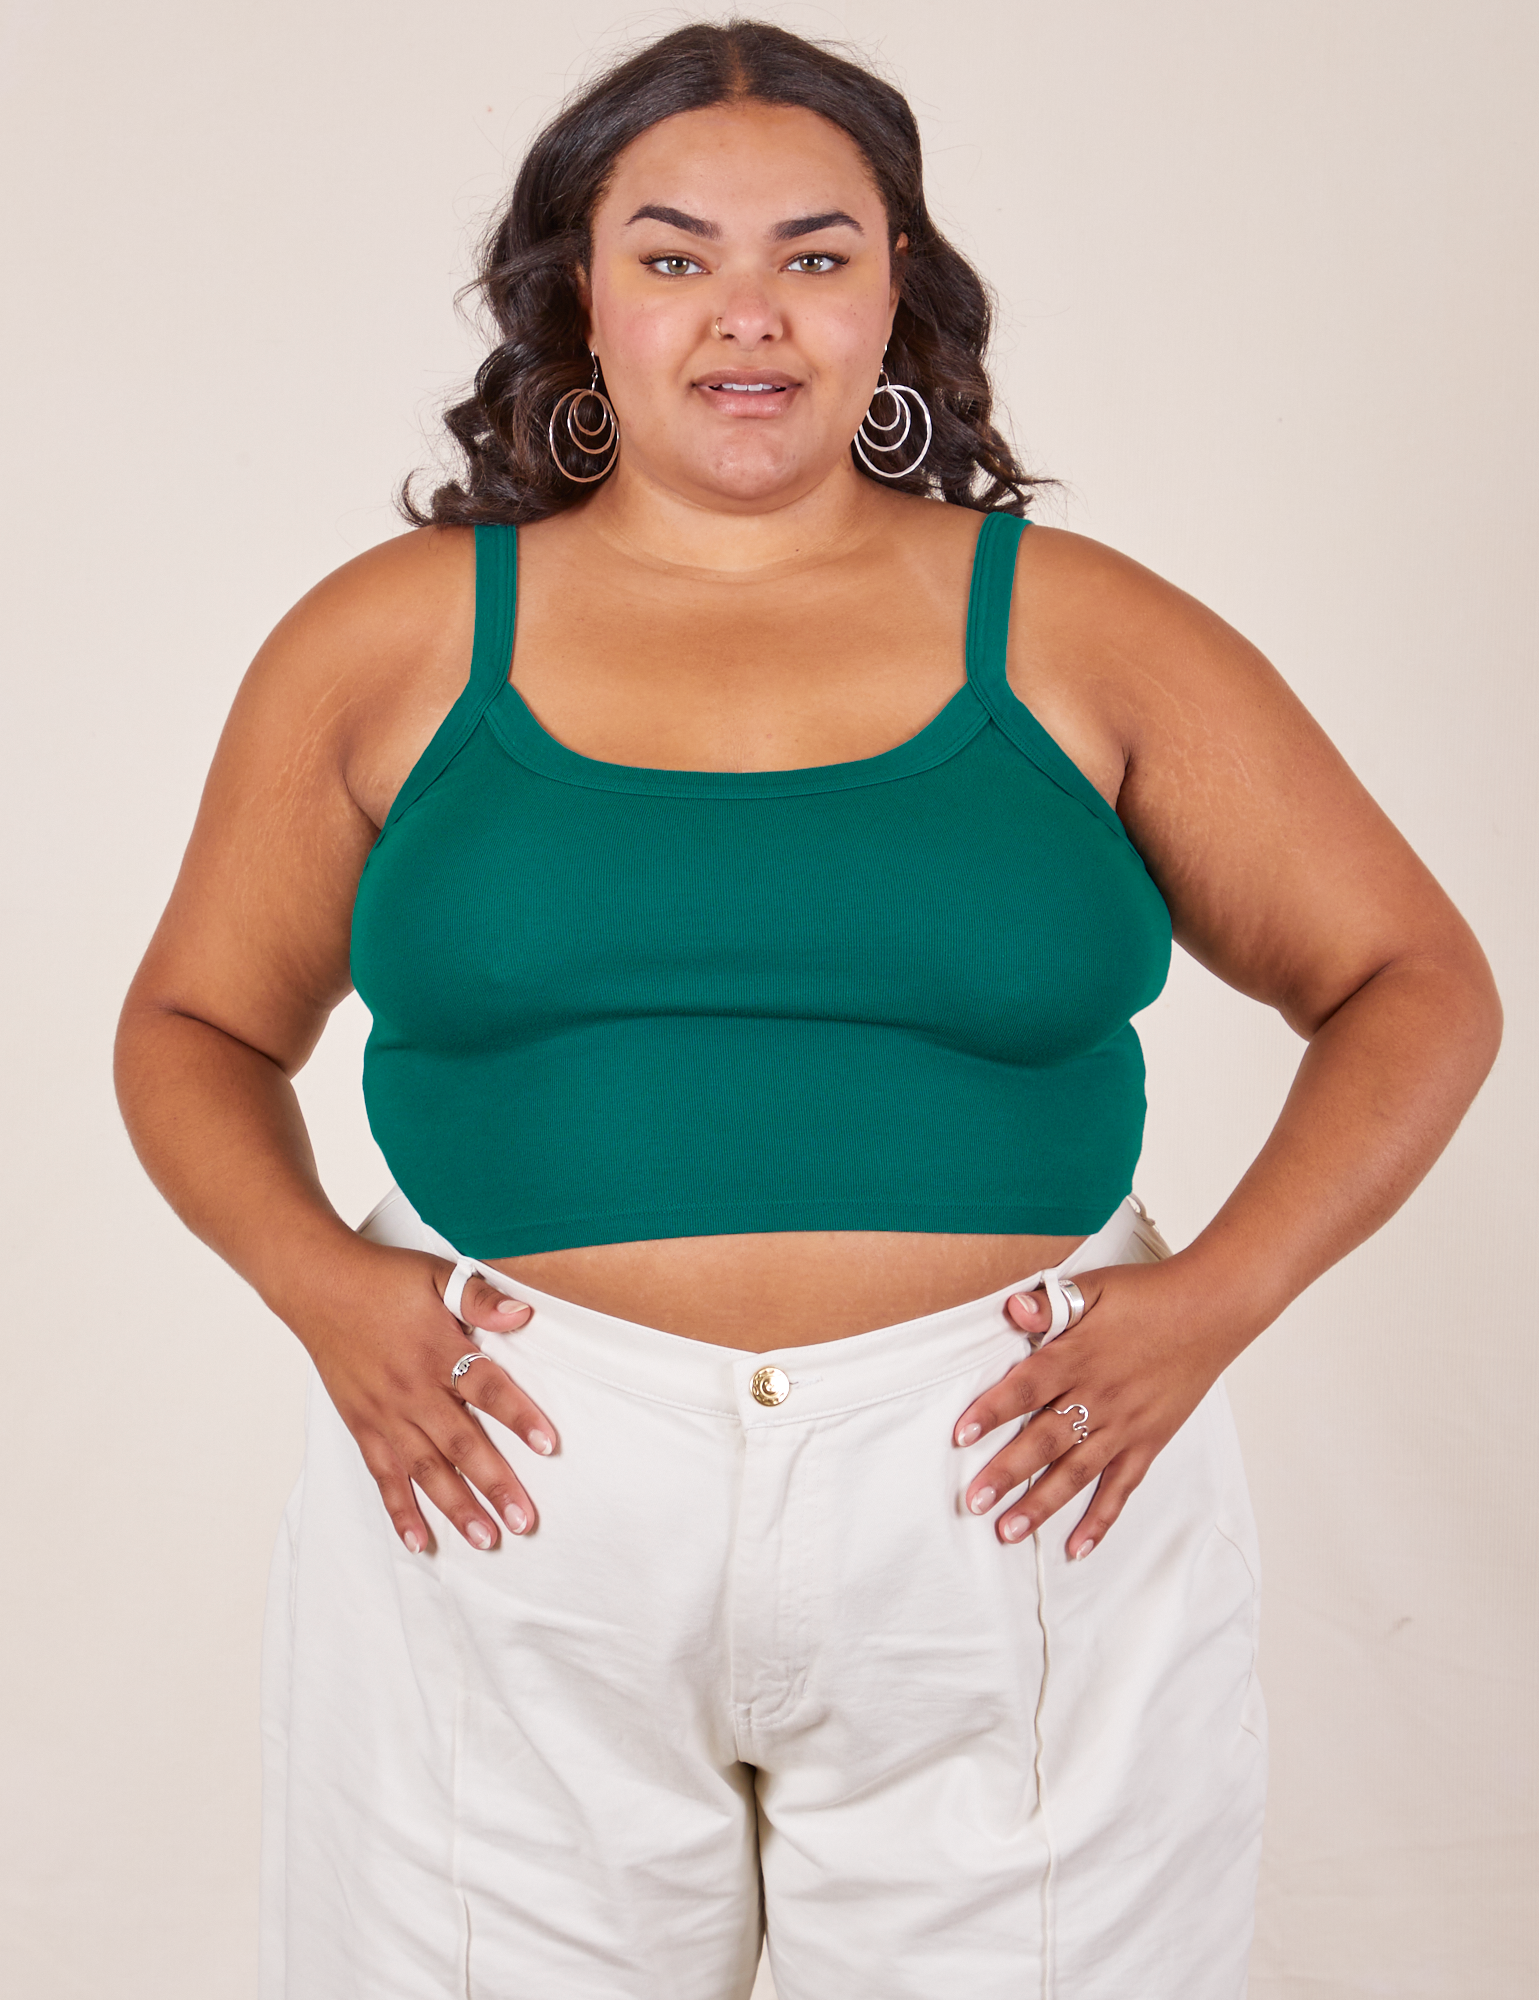 Alicia is 5'9" and wearing XL Cropped Cami in Hunter Green paired with vintage off-white Western Pants